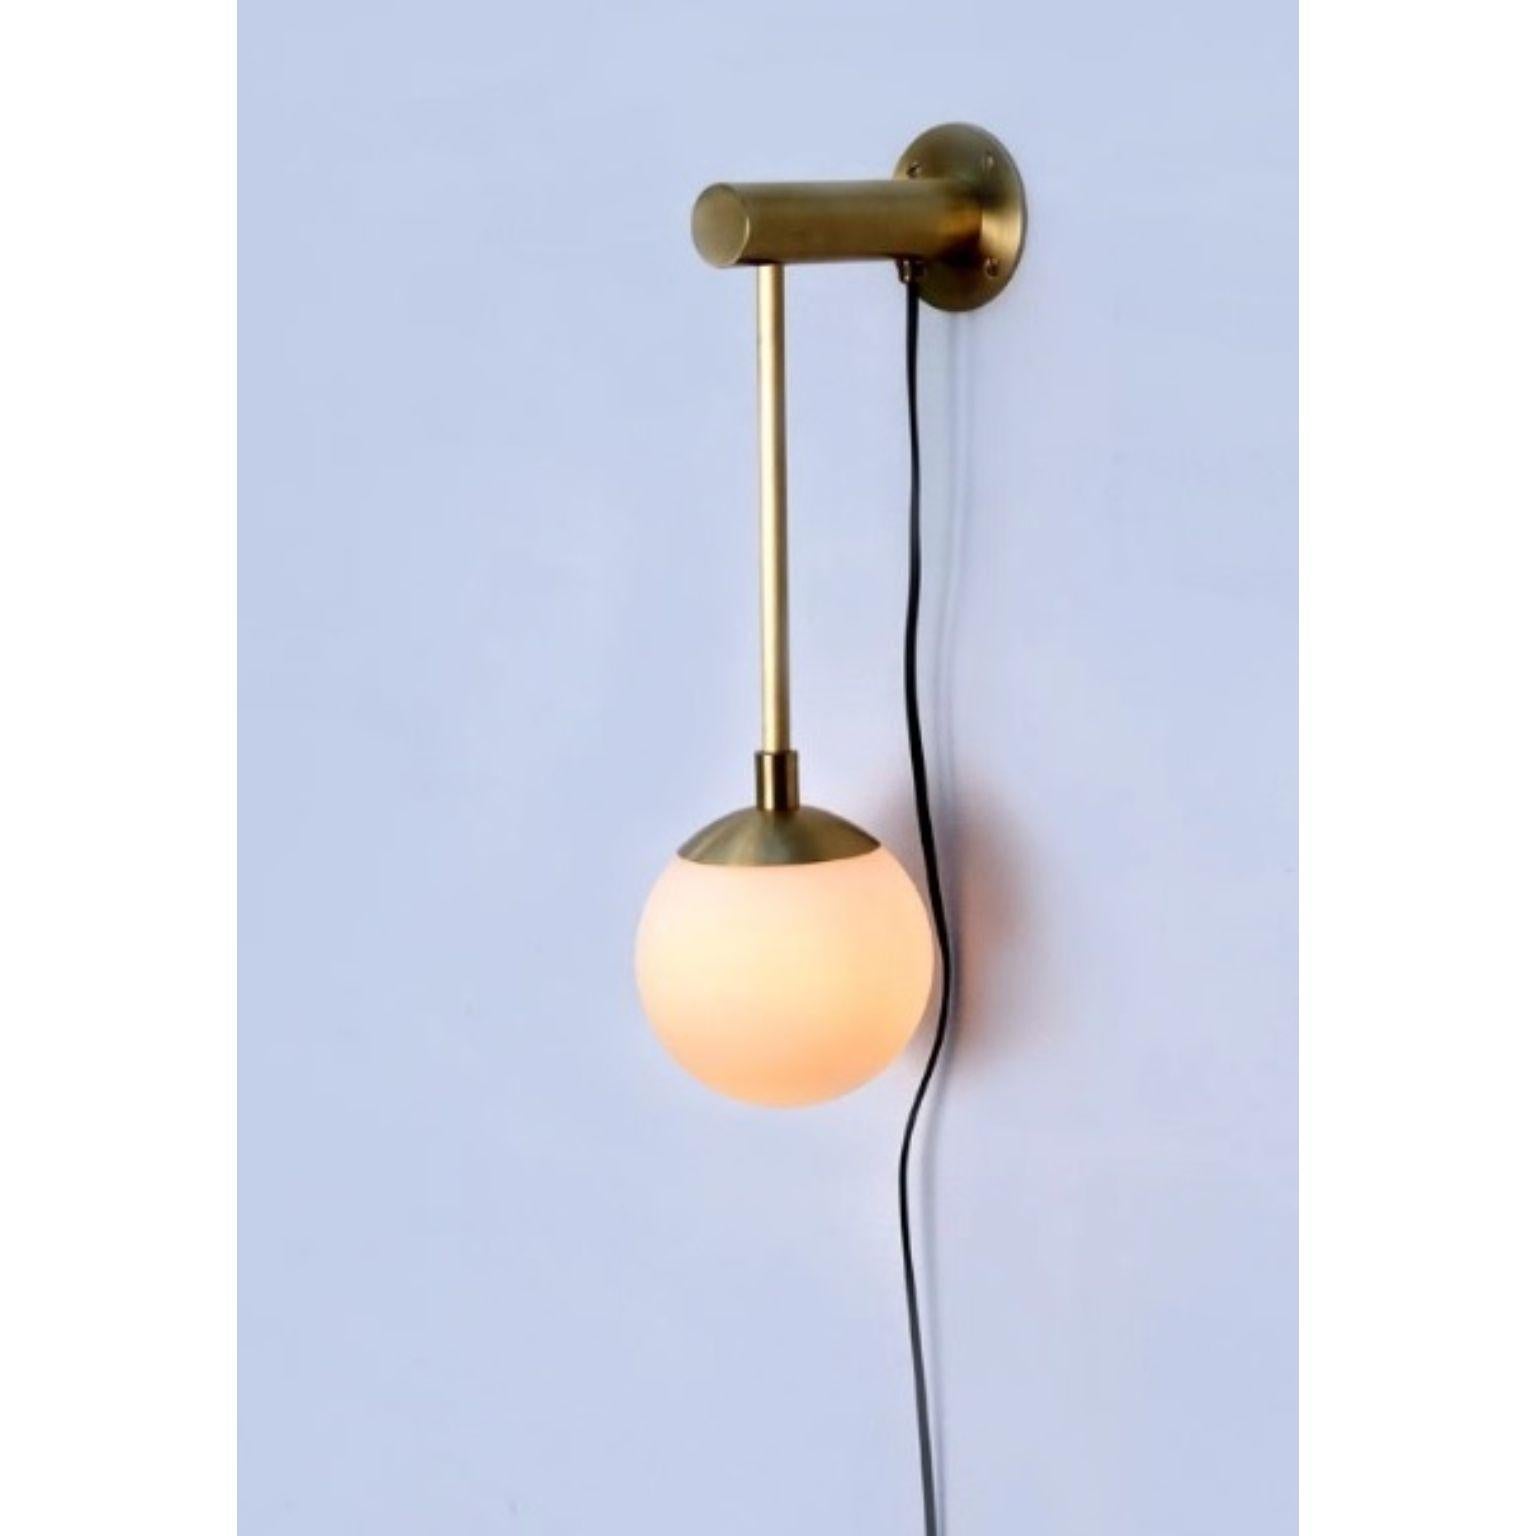 Dot Medium Glass Globe Wall Sconce by Lamp Shaper
Dimensions: D 15 x W 19 x H 51 cm.
Materials: Brass and glass.

Different finishes available: raw brass, aged brass, burnt brass and brushed brass Please contact us.

All our lamps can be wired